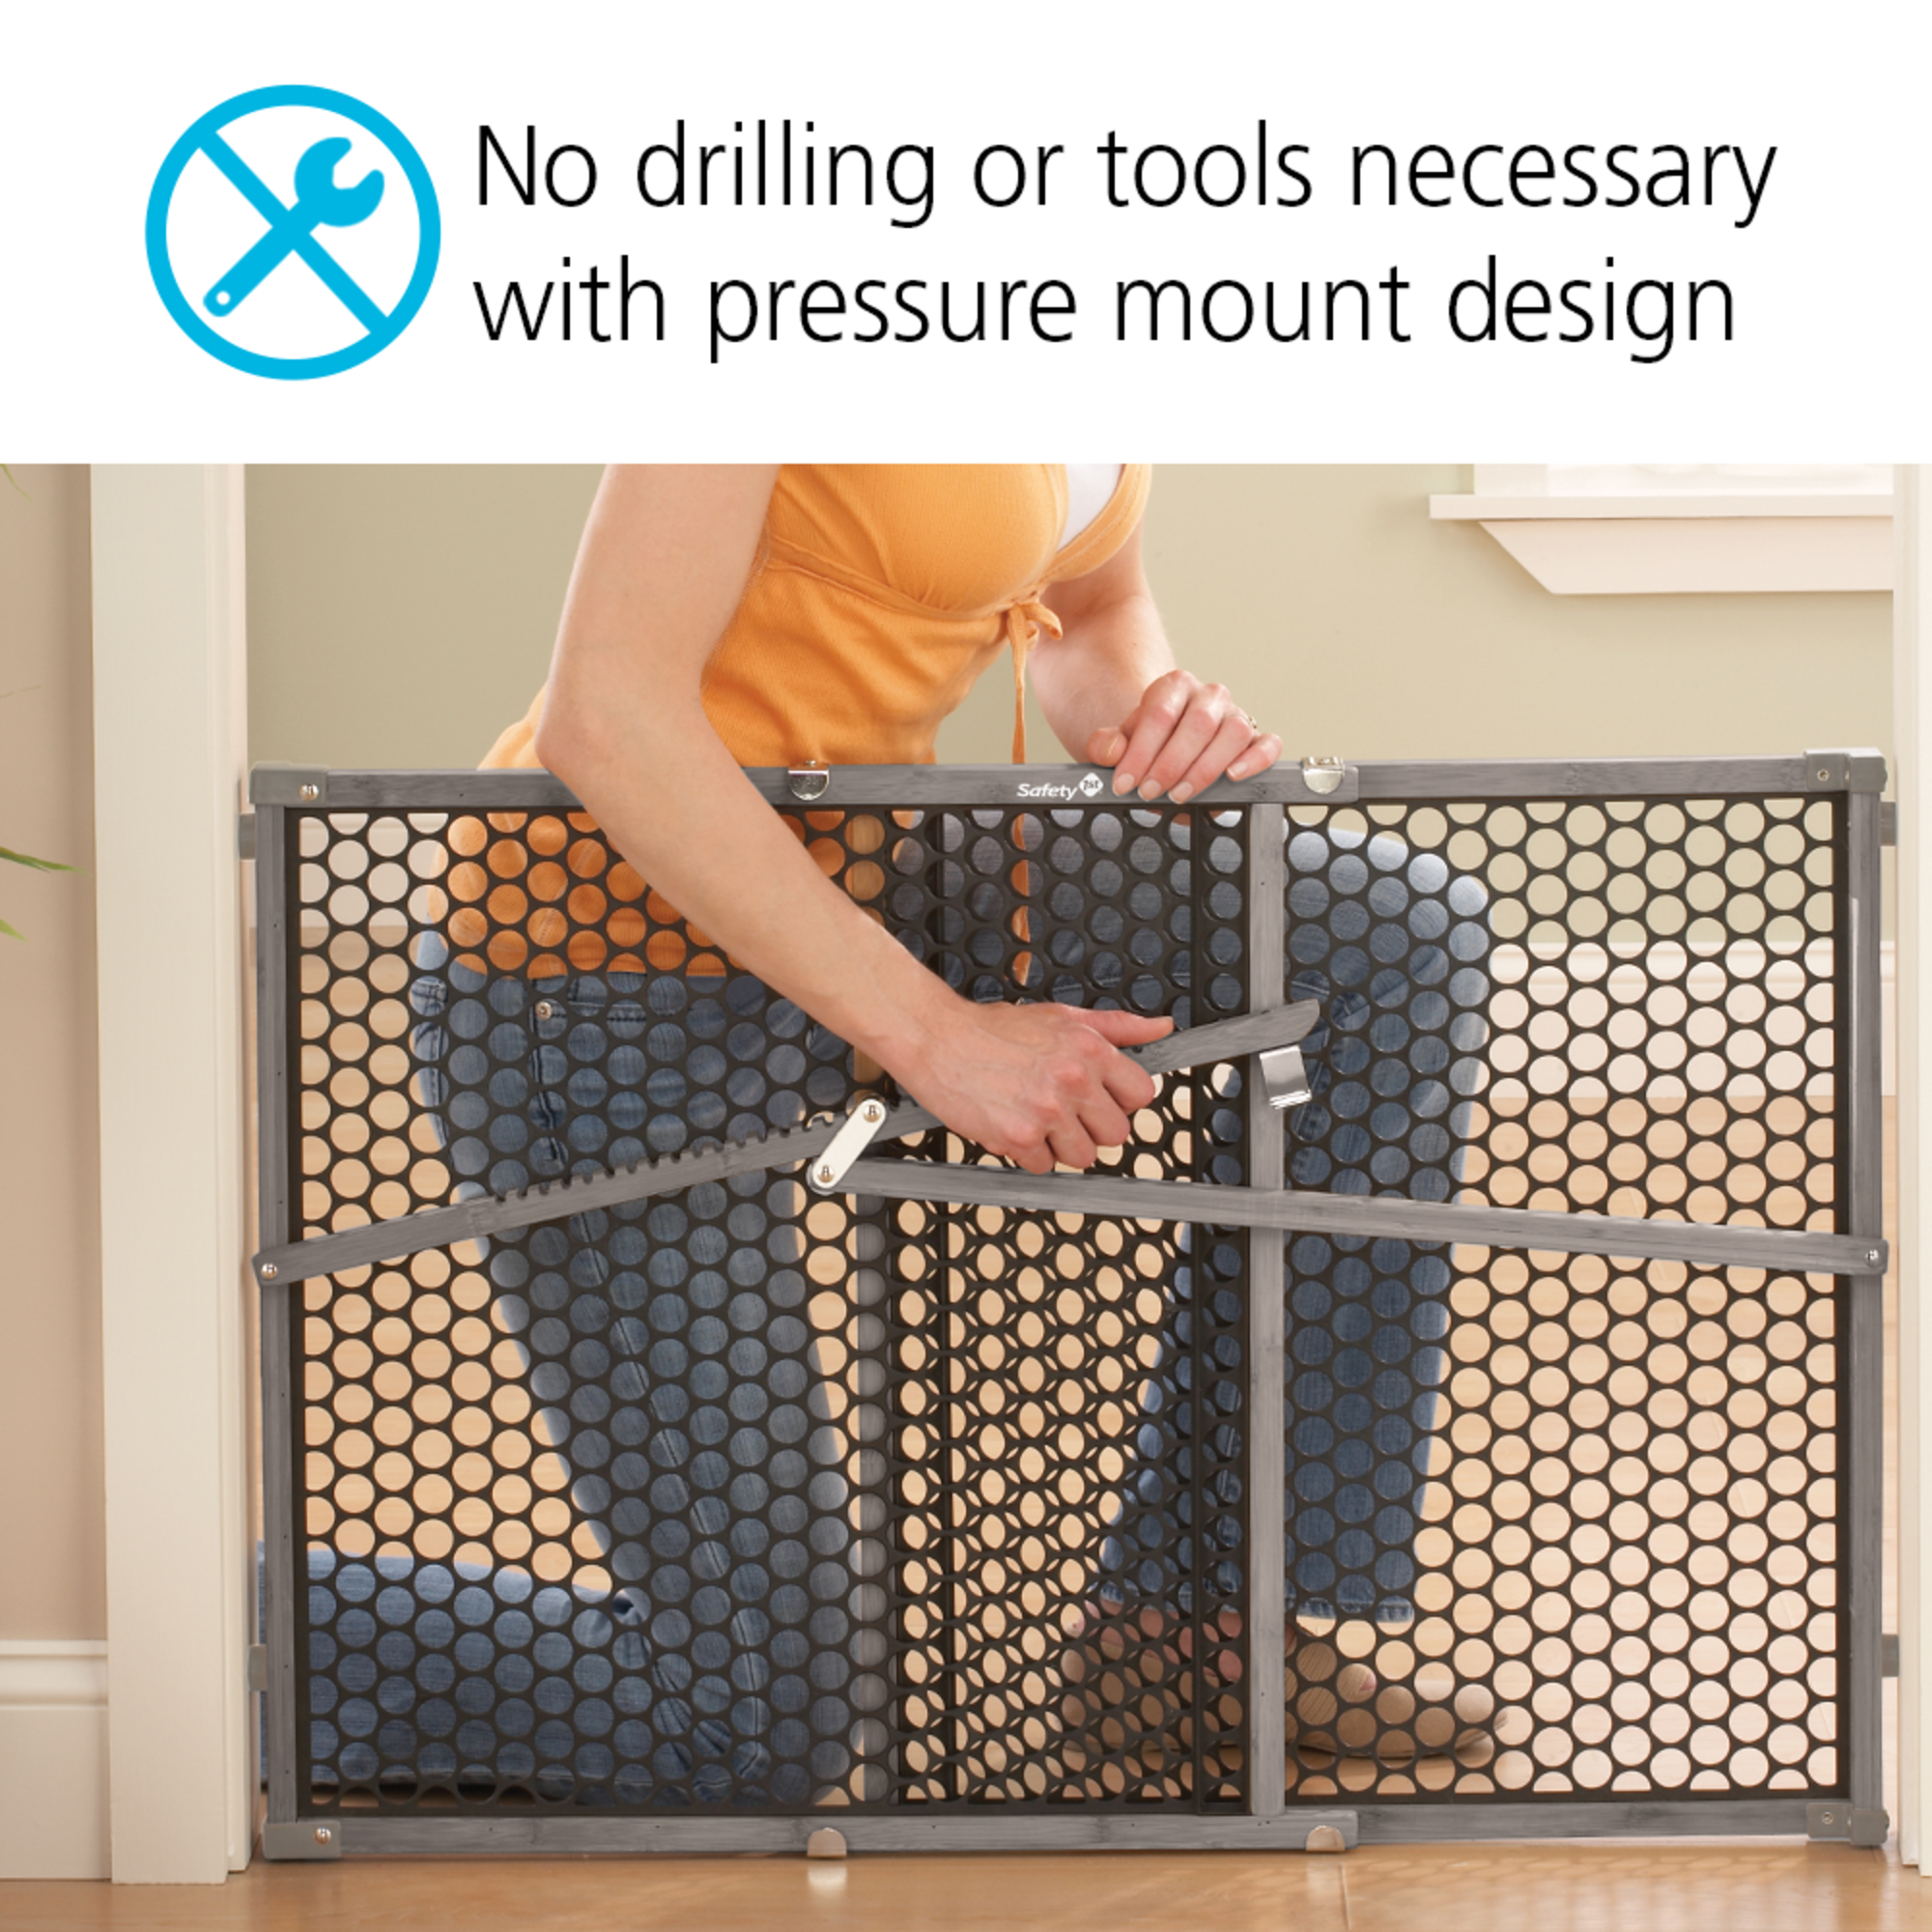 Parent demonstrating baby gate no drilling or tools necessary with pressure mount design.